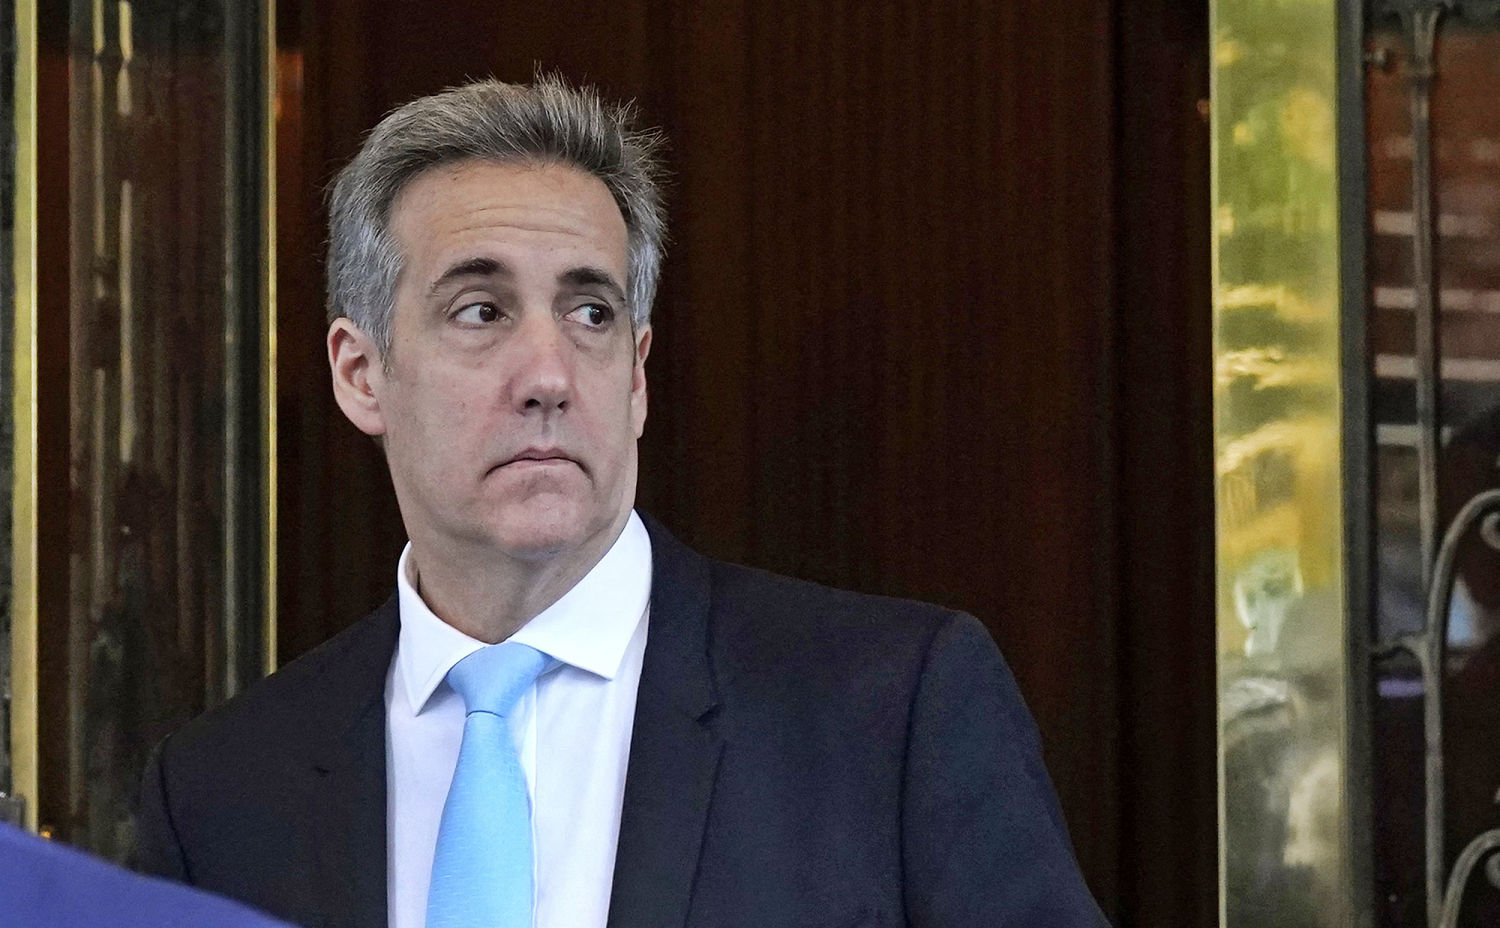 'Don't worry, I'm the president': Cohen testifies Trump assured him he was protected